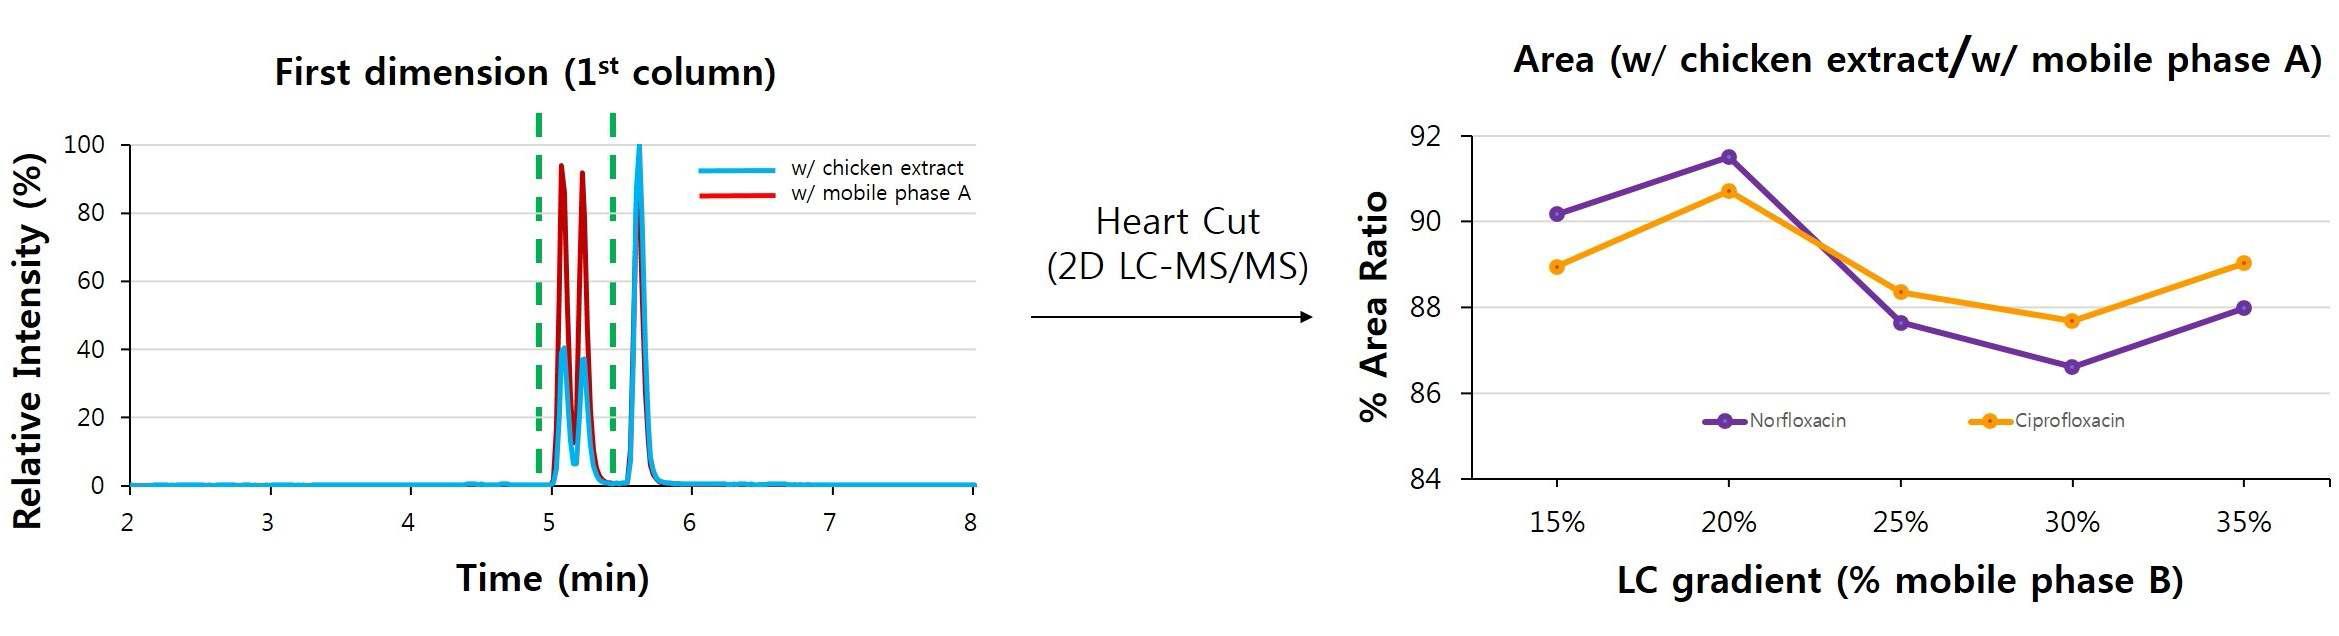 Determination of LC condition to eliminate matrices in the fluoroquinolones sample mixed with chicken extract using Heart Cut method. Norfloxacin and ciprofloxacin between dotted lines in the left side of the figure were isolated together for Heart Cut during trapping onto the second column after 1 dimensional separation with 1st column (40% mobile phase B) and followed by MS analysis.